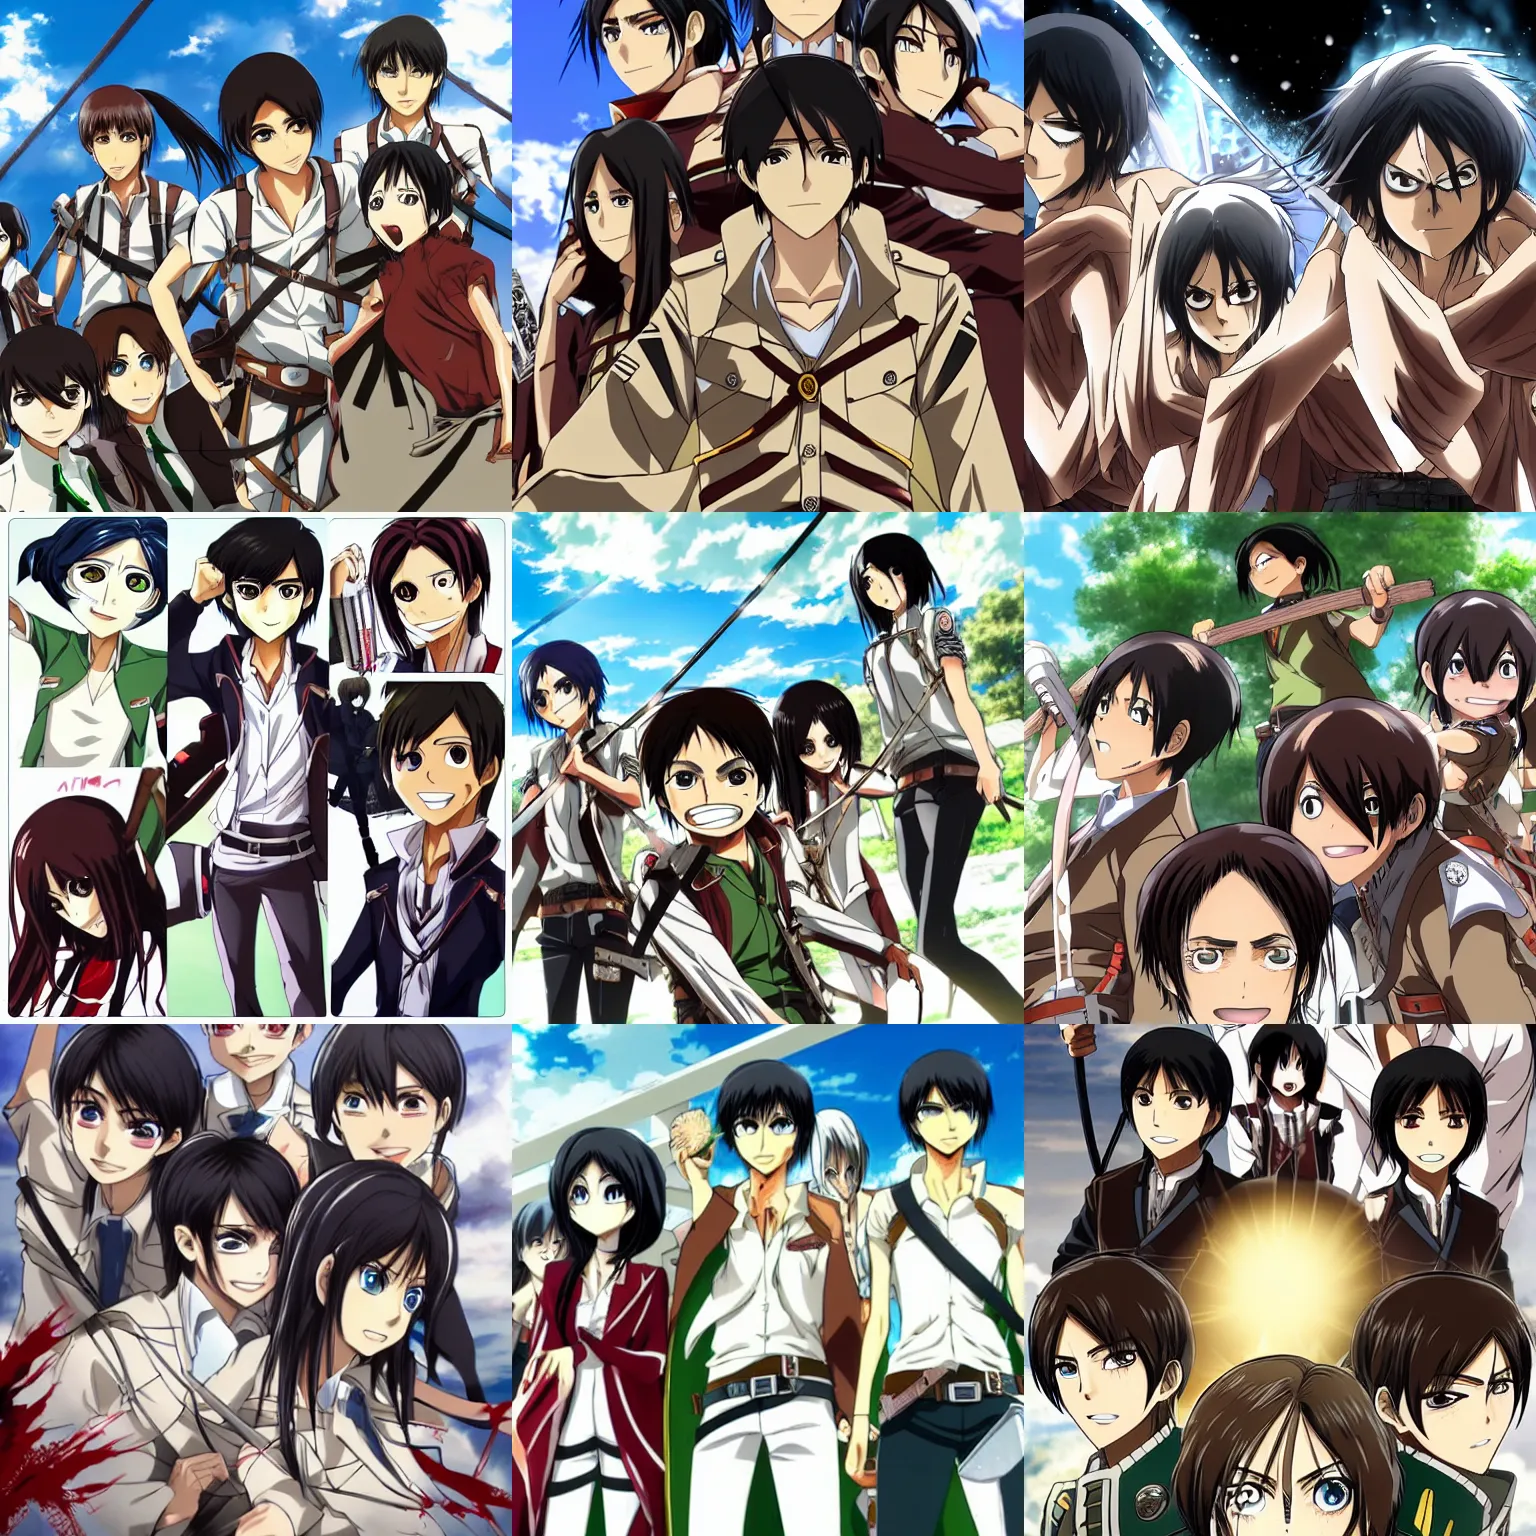 Prompt: anime group photo of eren yeager from attack on titan, albedo from genshin impact, tanjiro from demon slayer